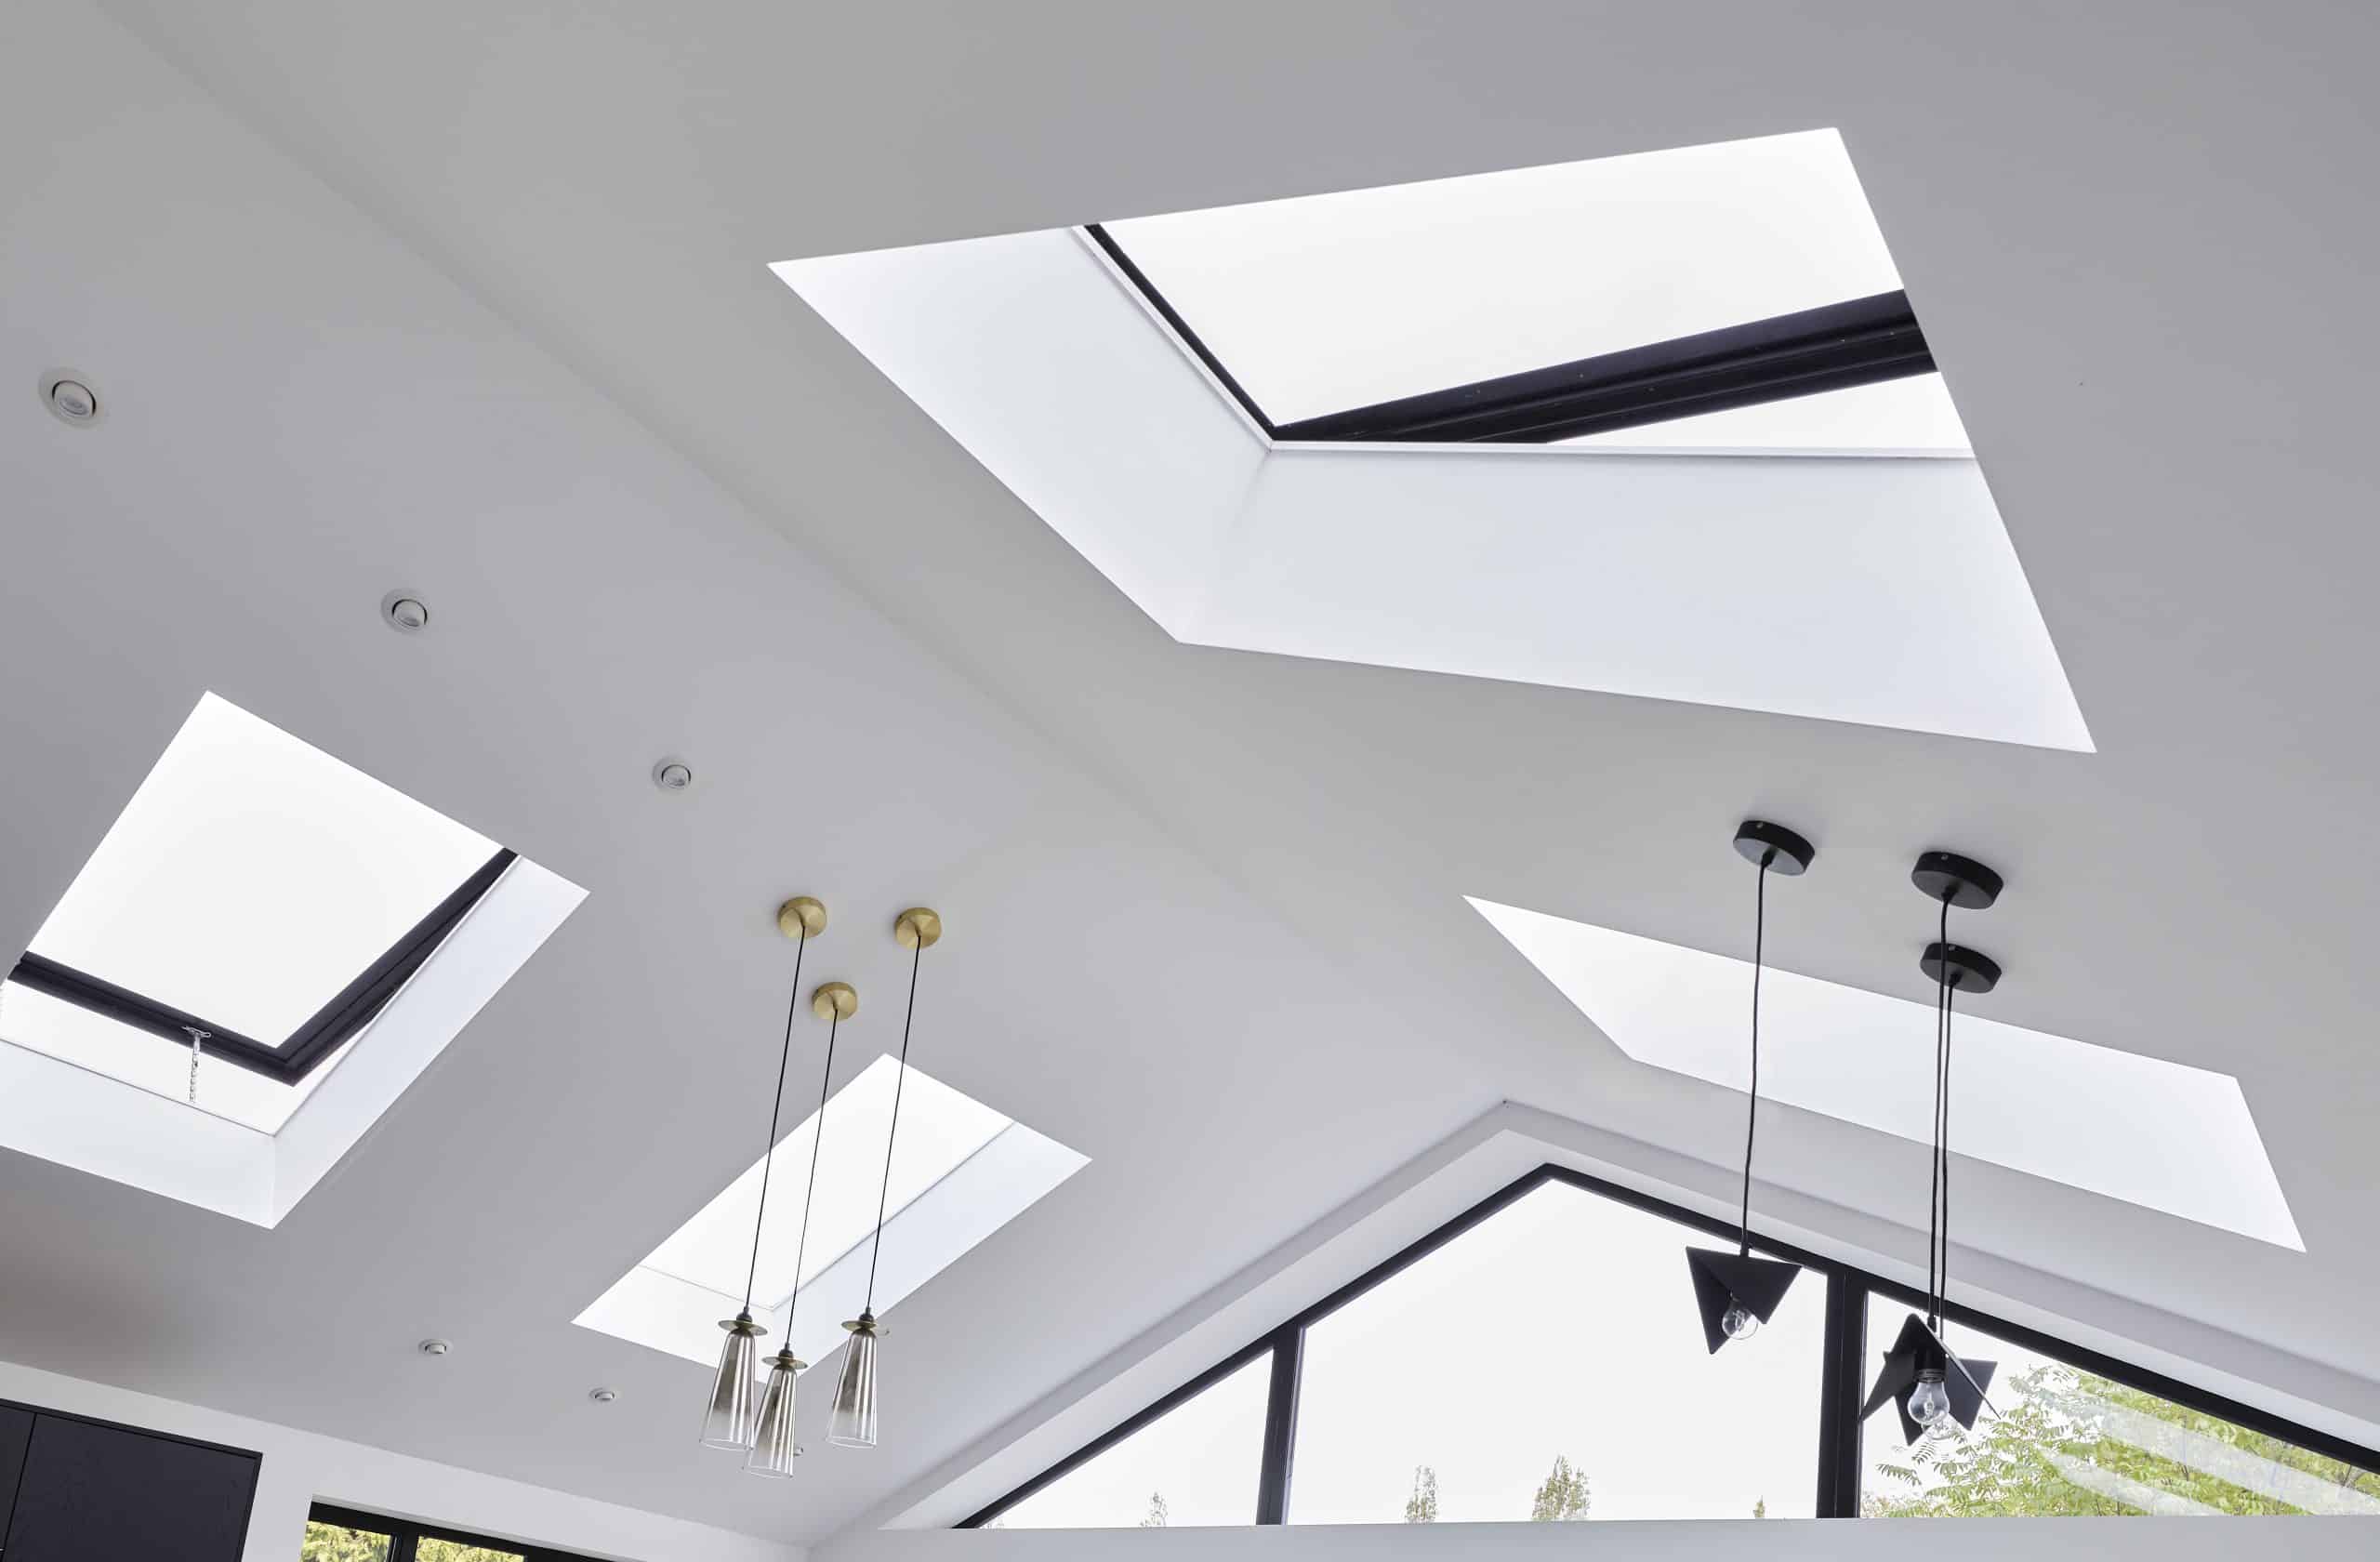 Four pitched rooflights in spacious roof